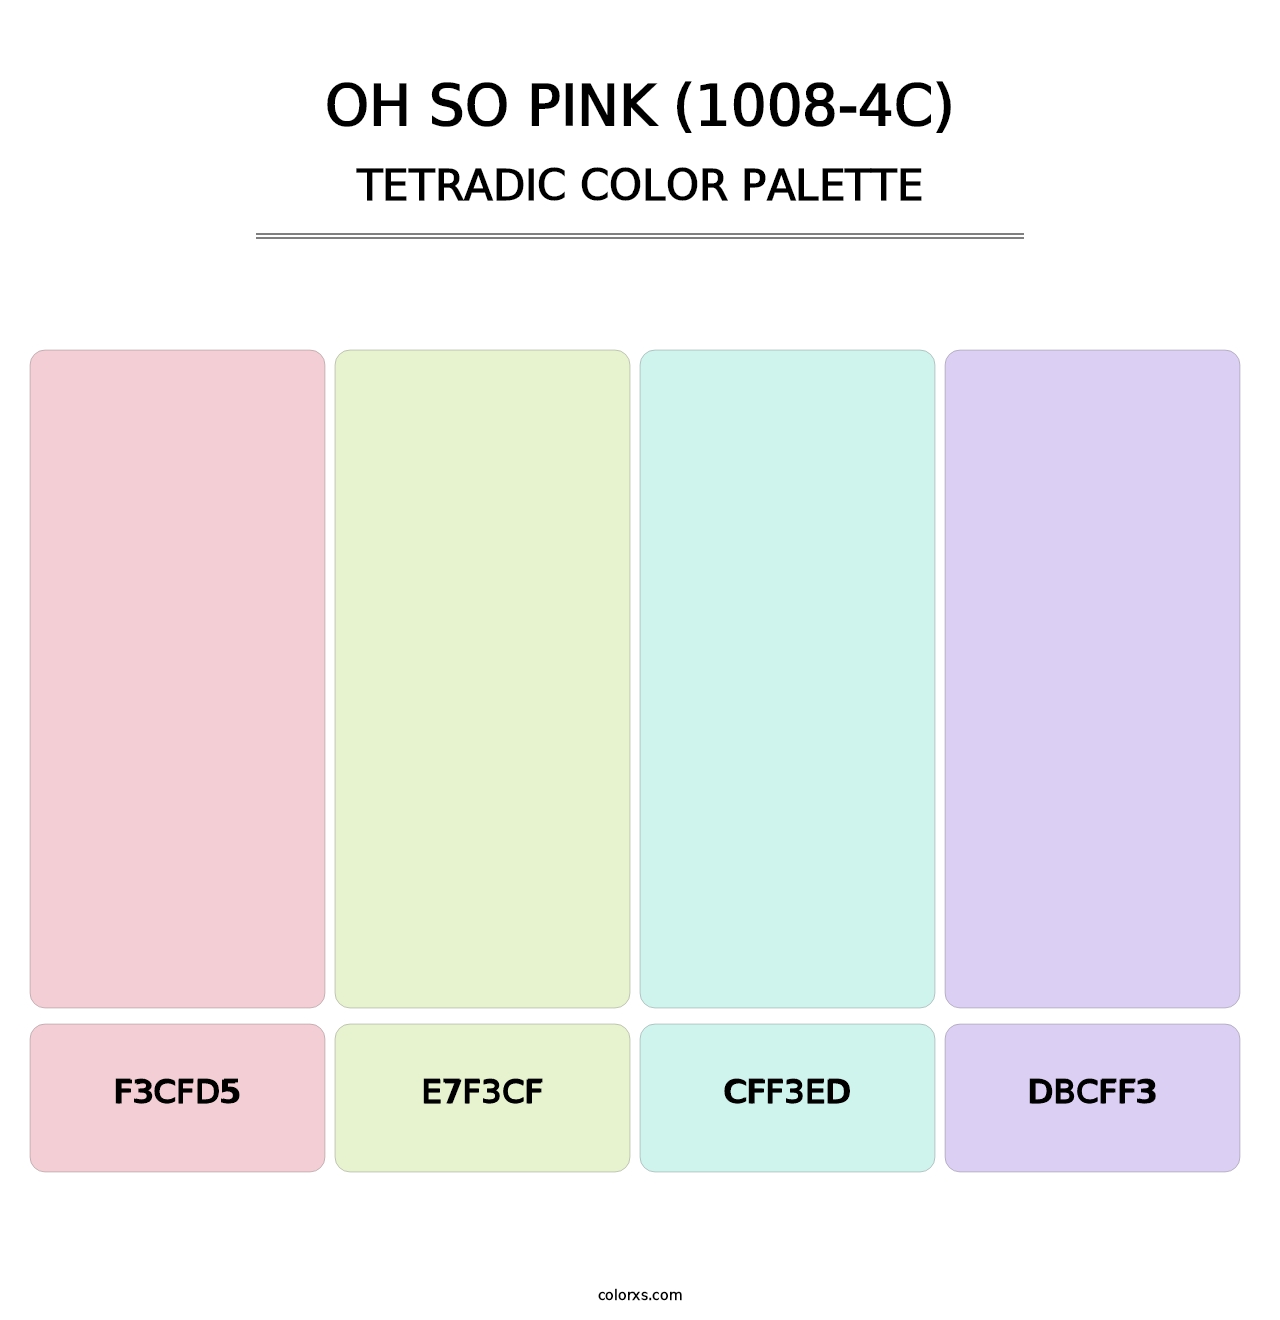 Oh So Pink (1008-4C) - Tetradic Color Palette